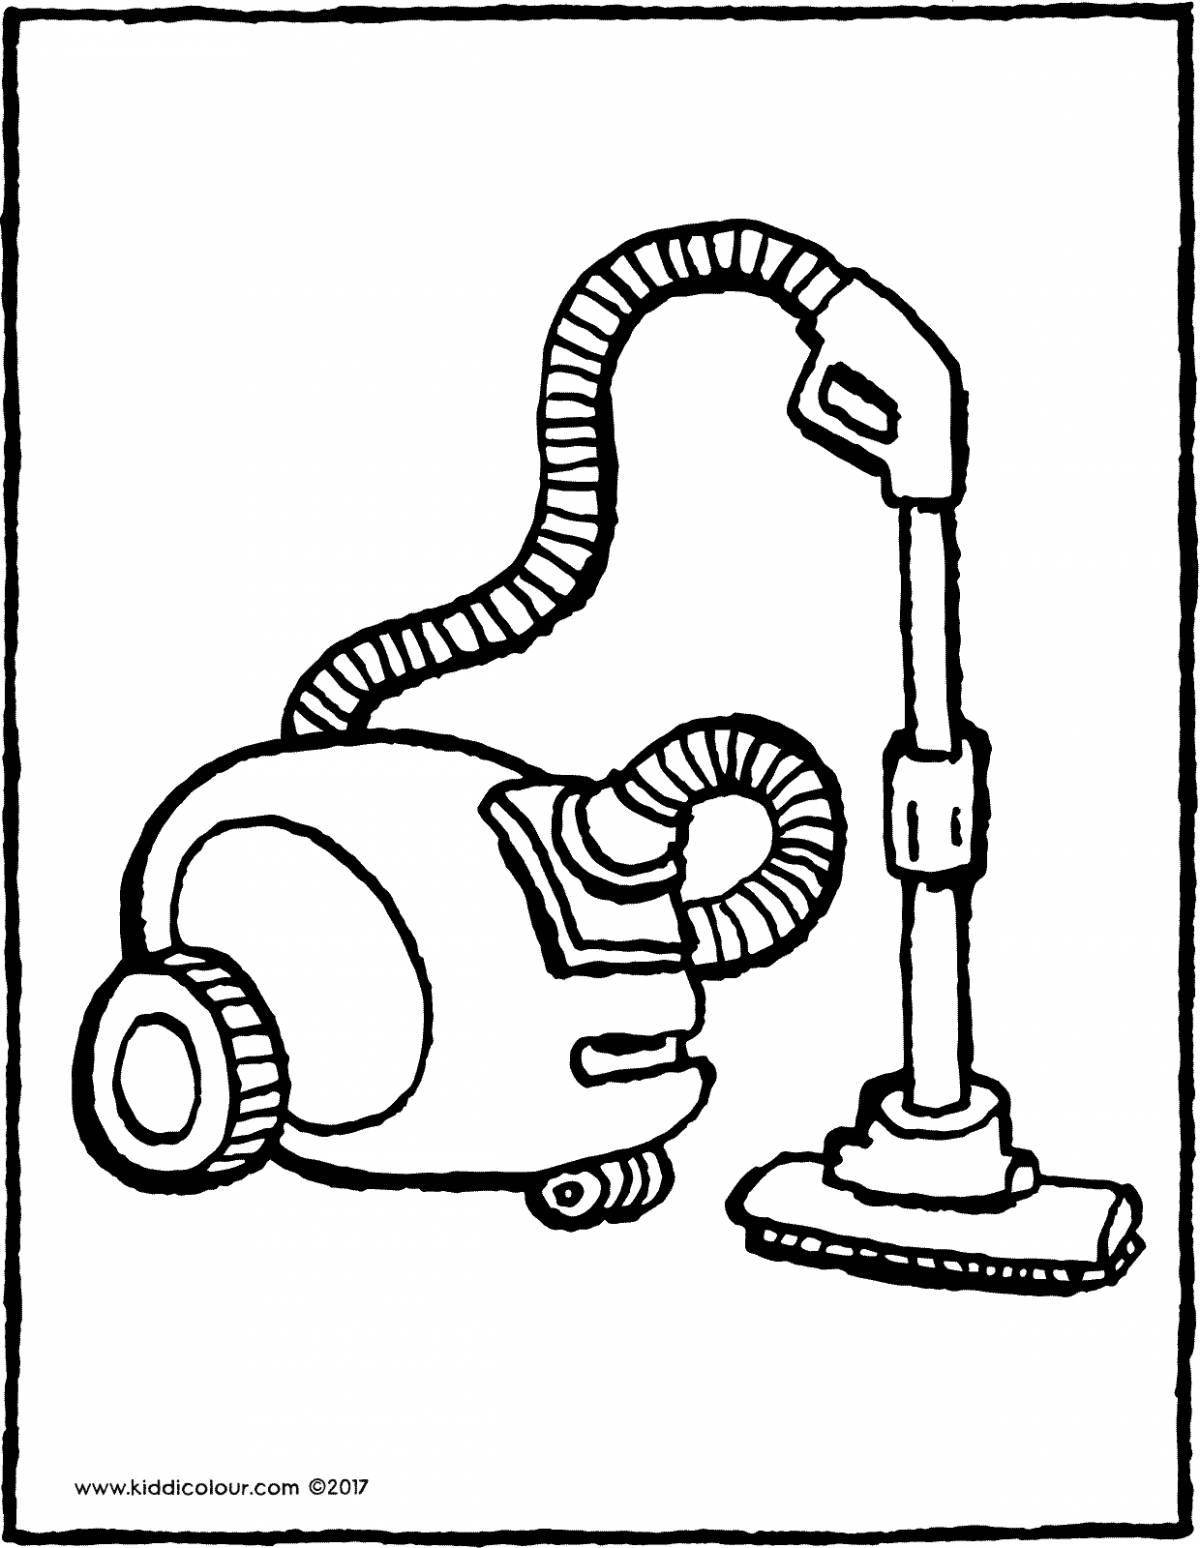 Creative household appliances coloring pages for preschoolers 2-3